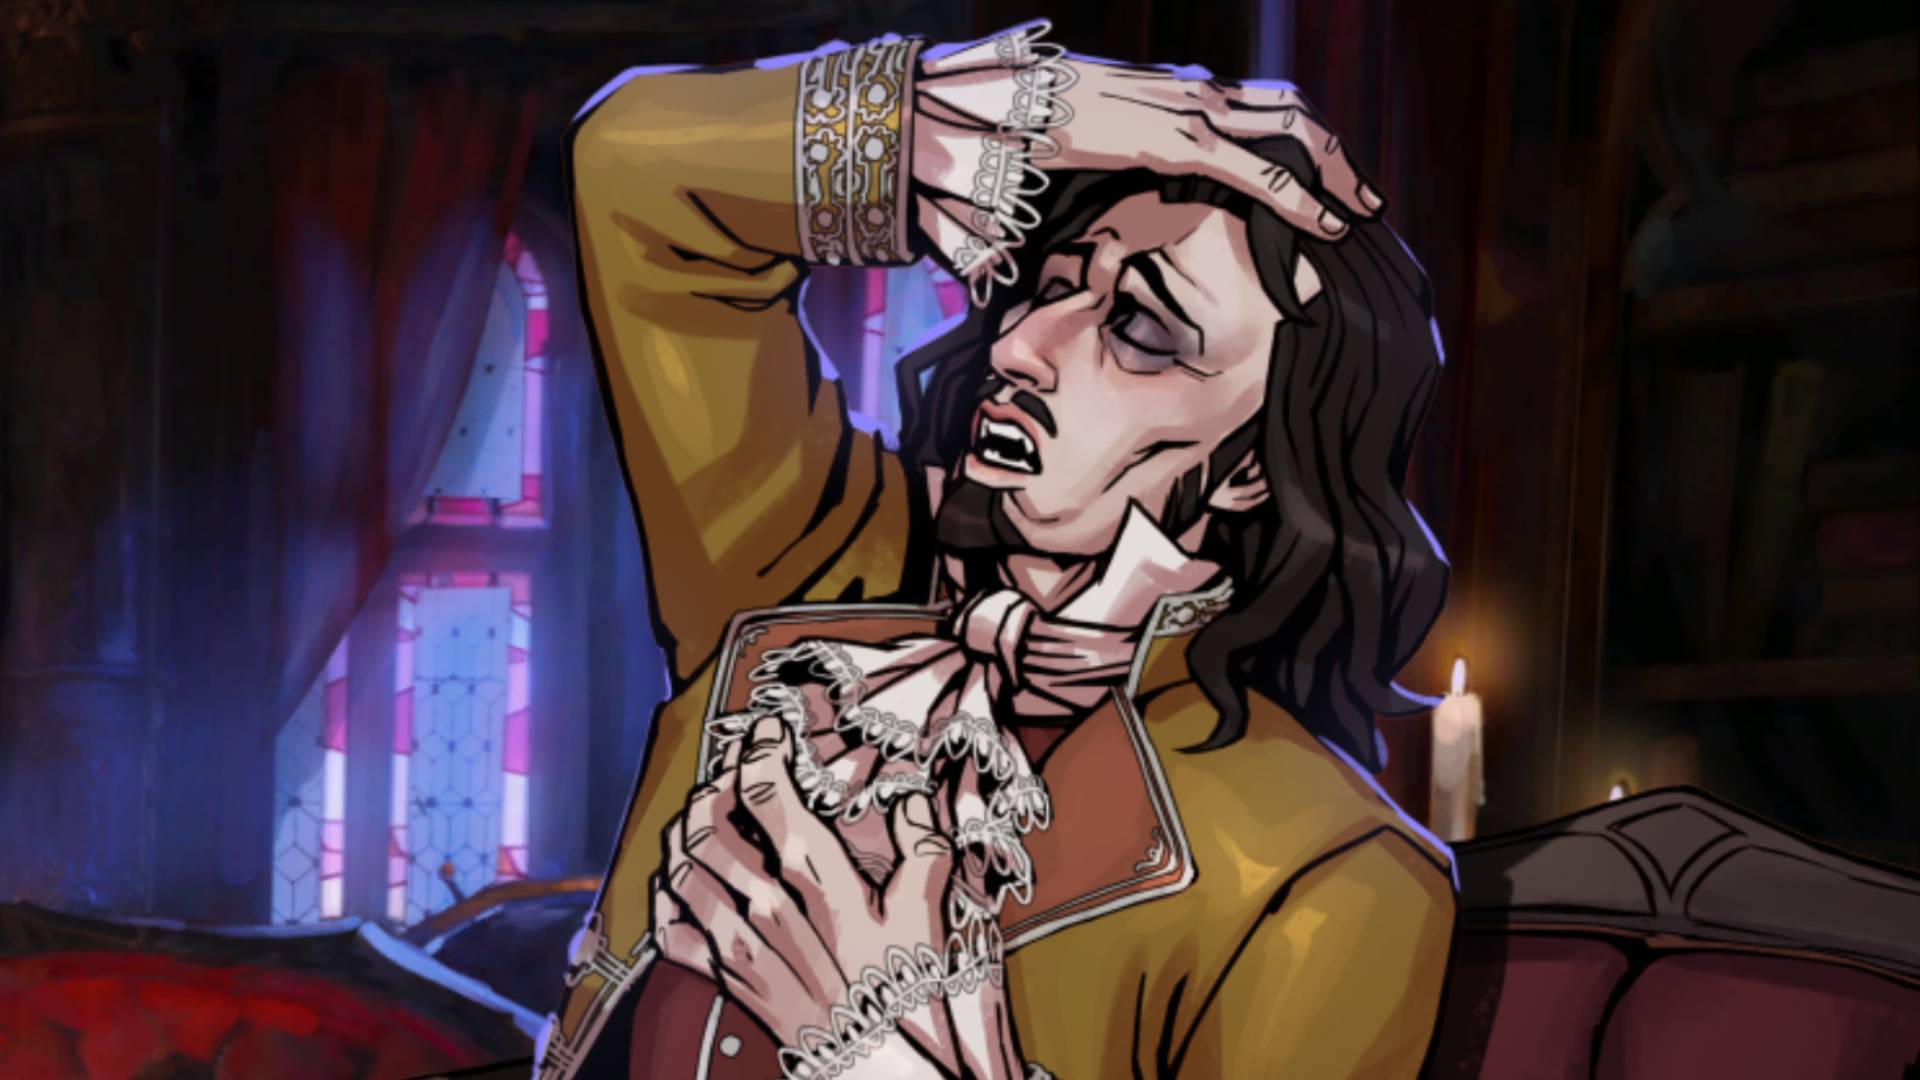 This new Steam RPG lets you therapize vampires, demo out now